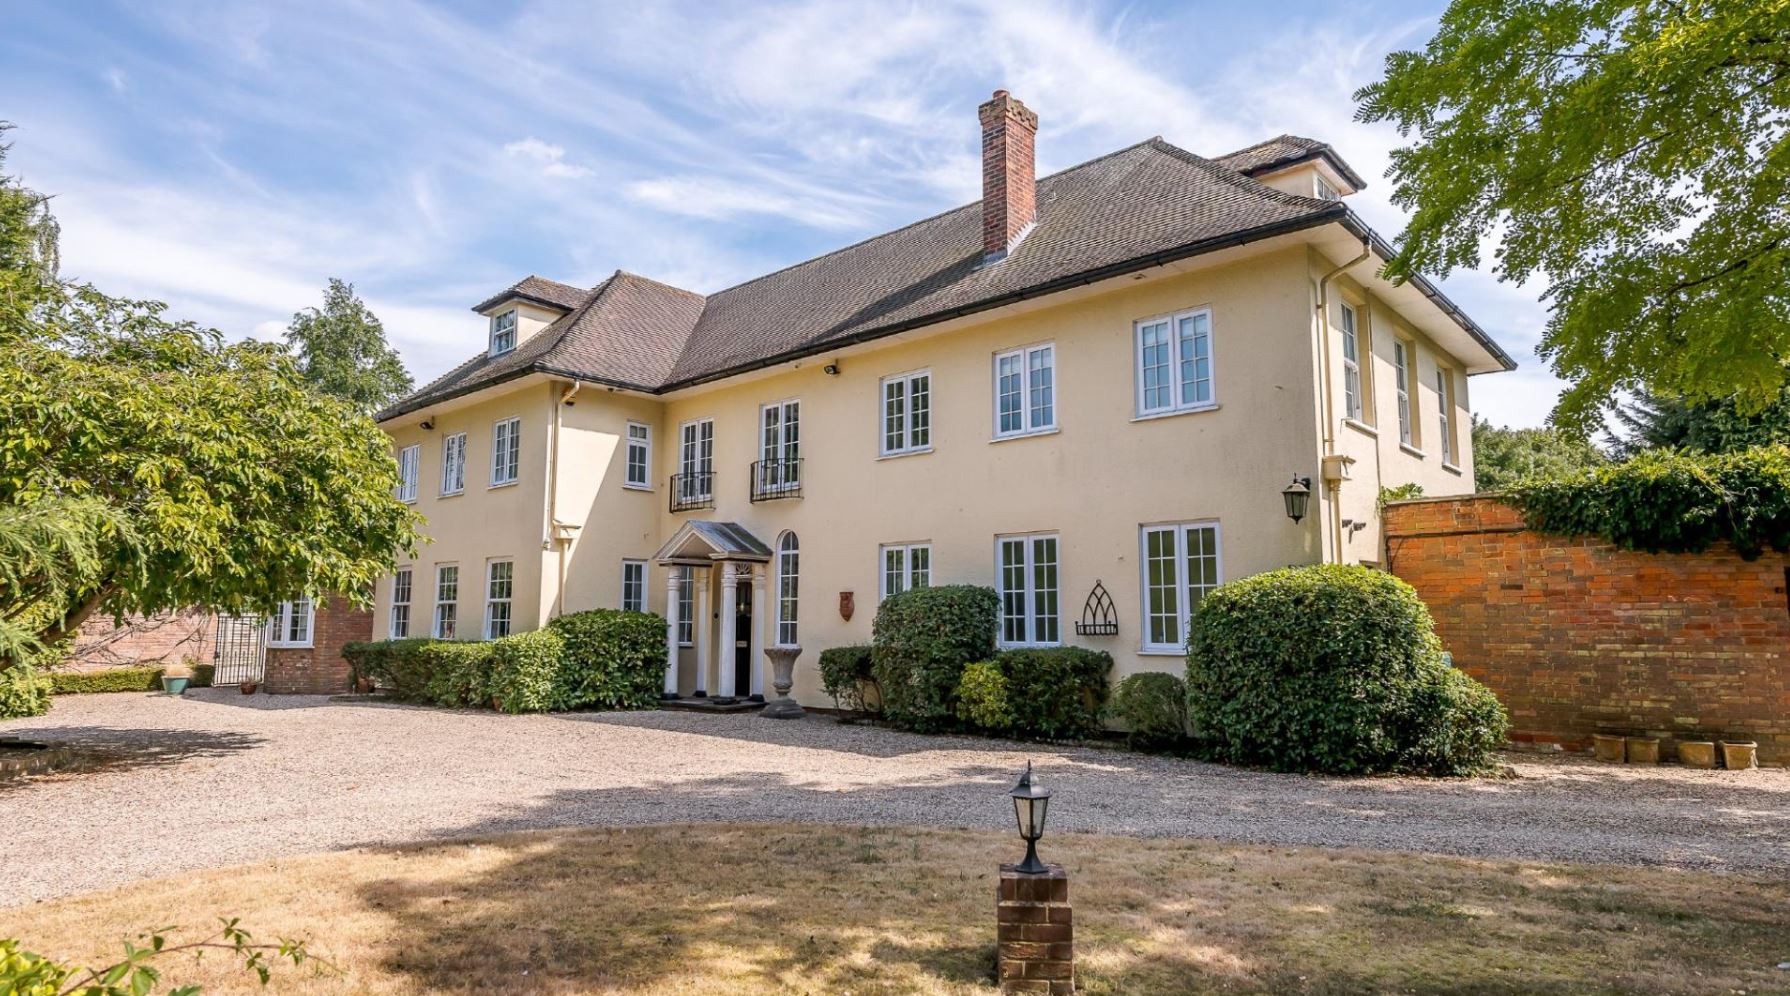 Lexden Manor : Characterful Colchester homes for sale now